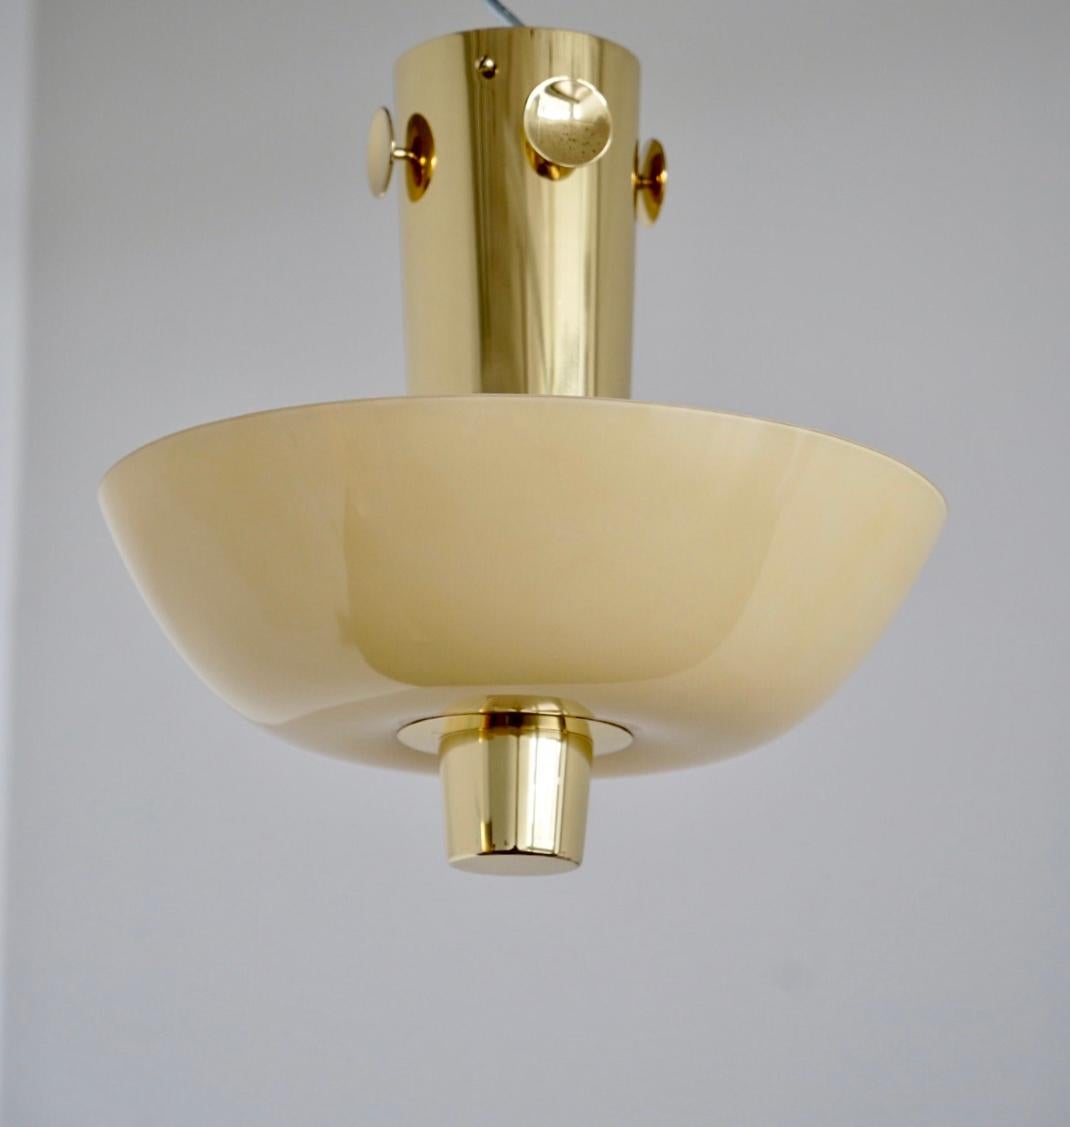 Rare available Model 9052, designed by Paavo Tynell for Taito/ Idman. Finland, Circa 1950th. Polished brass with opaline glass shade and 3 Edison socket bulbs.
Similar model featured at Idman catalogue.
Newly re-polished and waxed. Rewiring